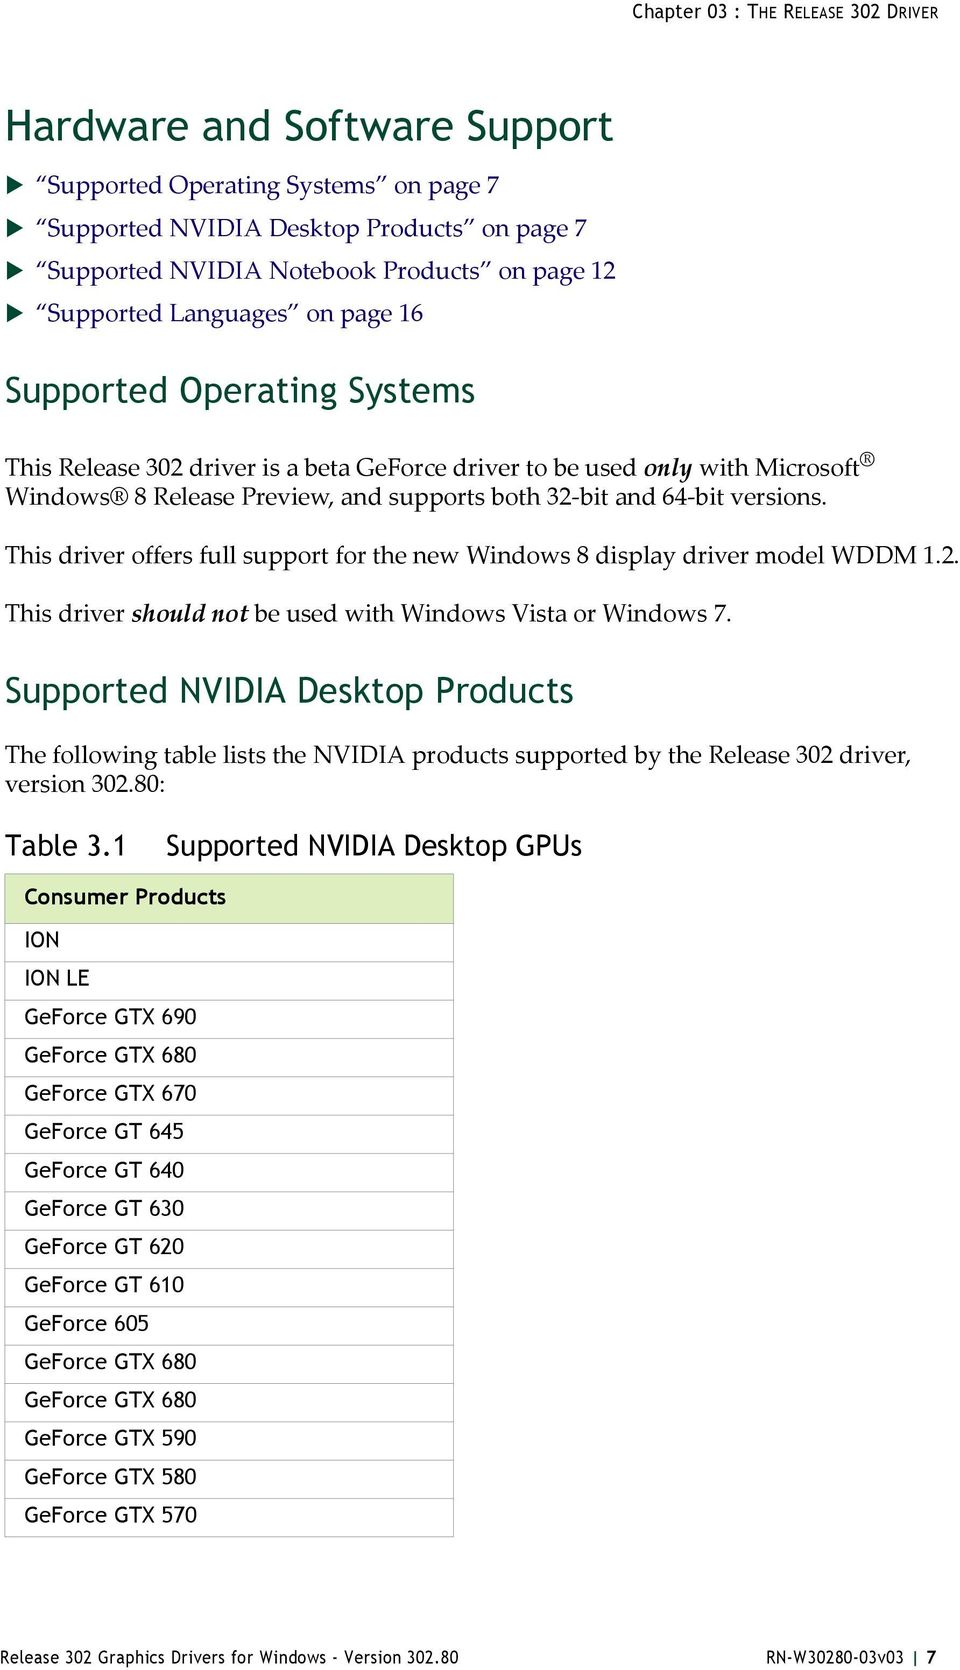 bit versions. This driver offers full support for the new Windows 8 display driver model WDDM 1.2. This driver should not be used with Windows Vista or Windows 7.